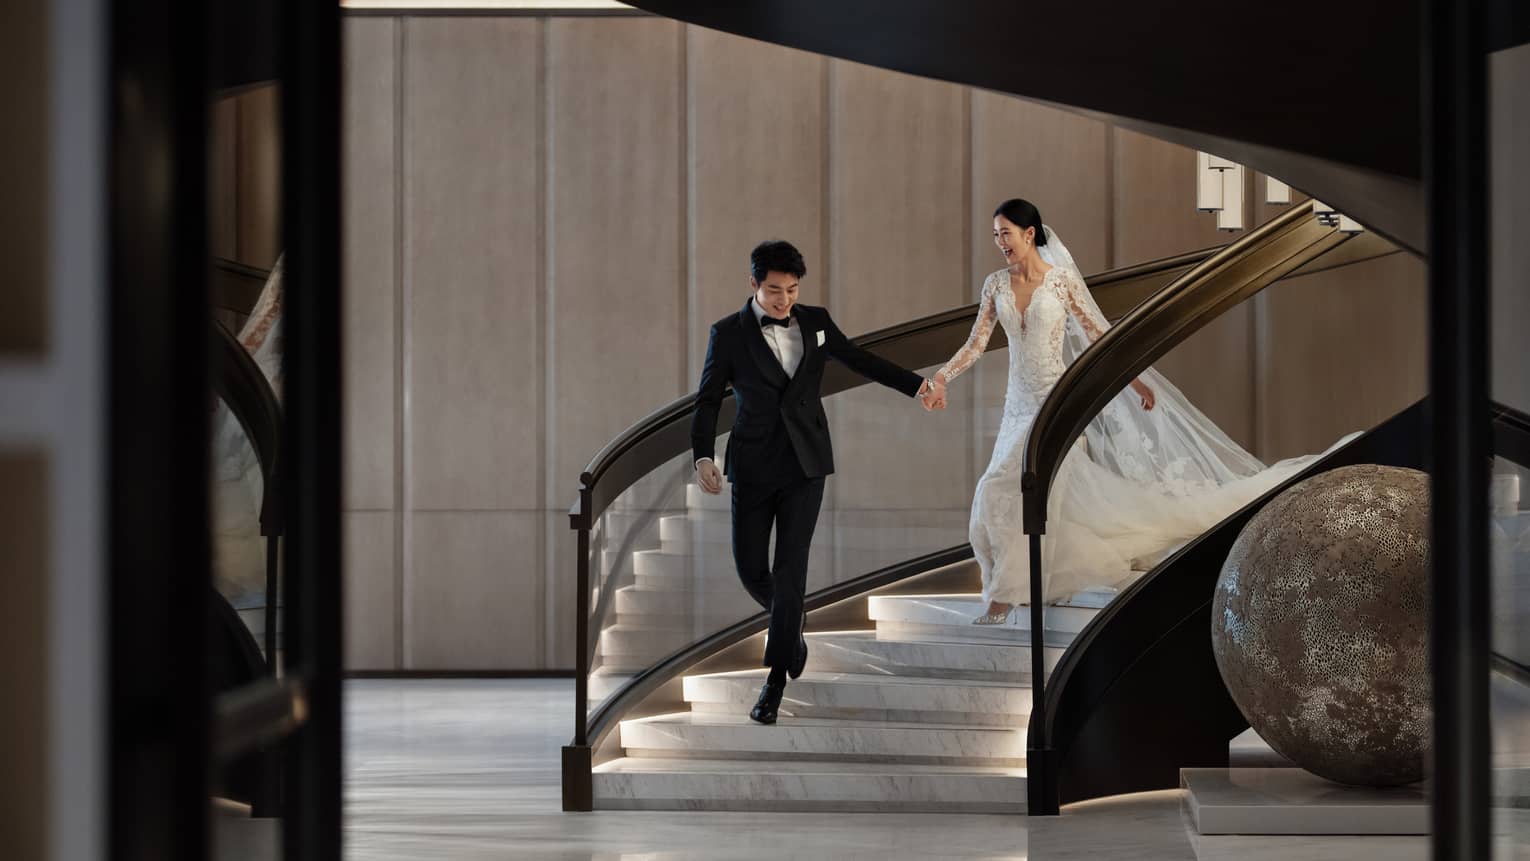 A smiling bride and groom walk hand in hand down the stairs at Four Seasons Hotel Dalian.